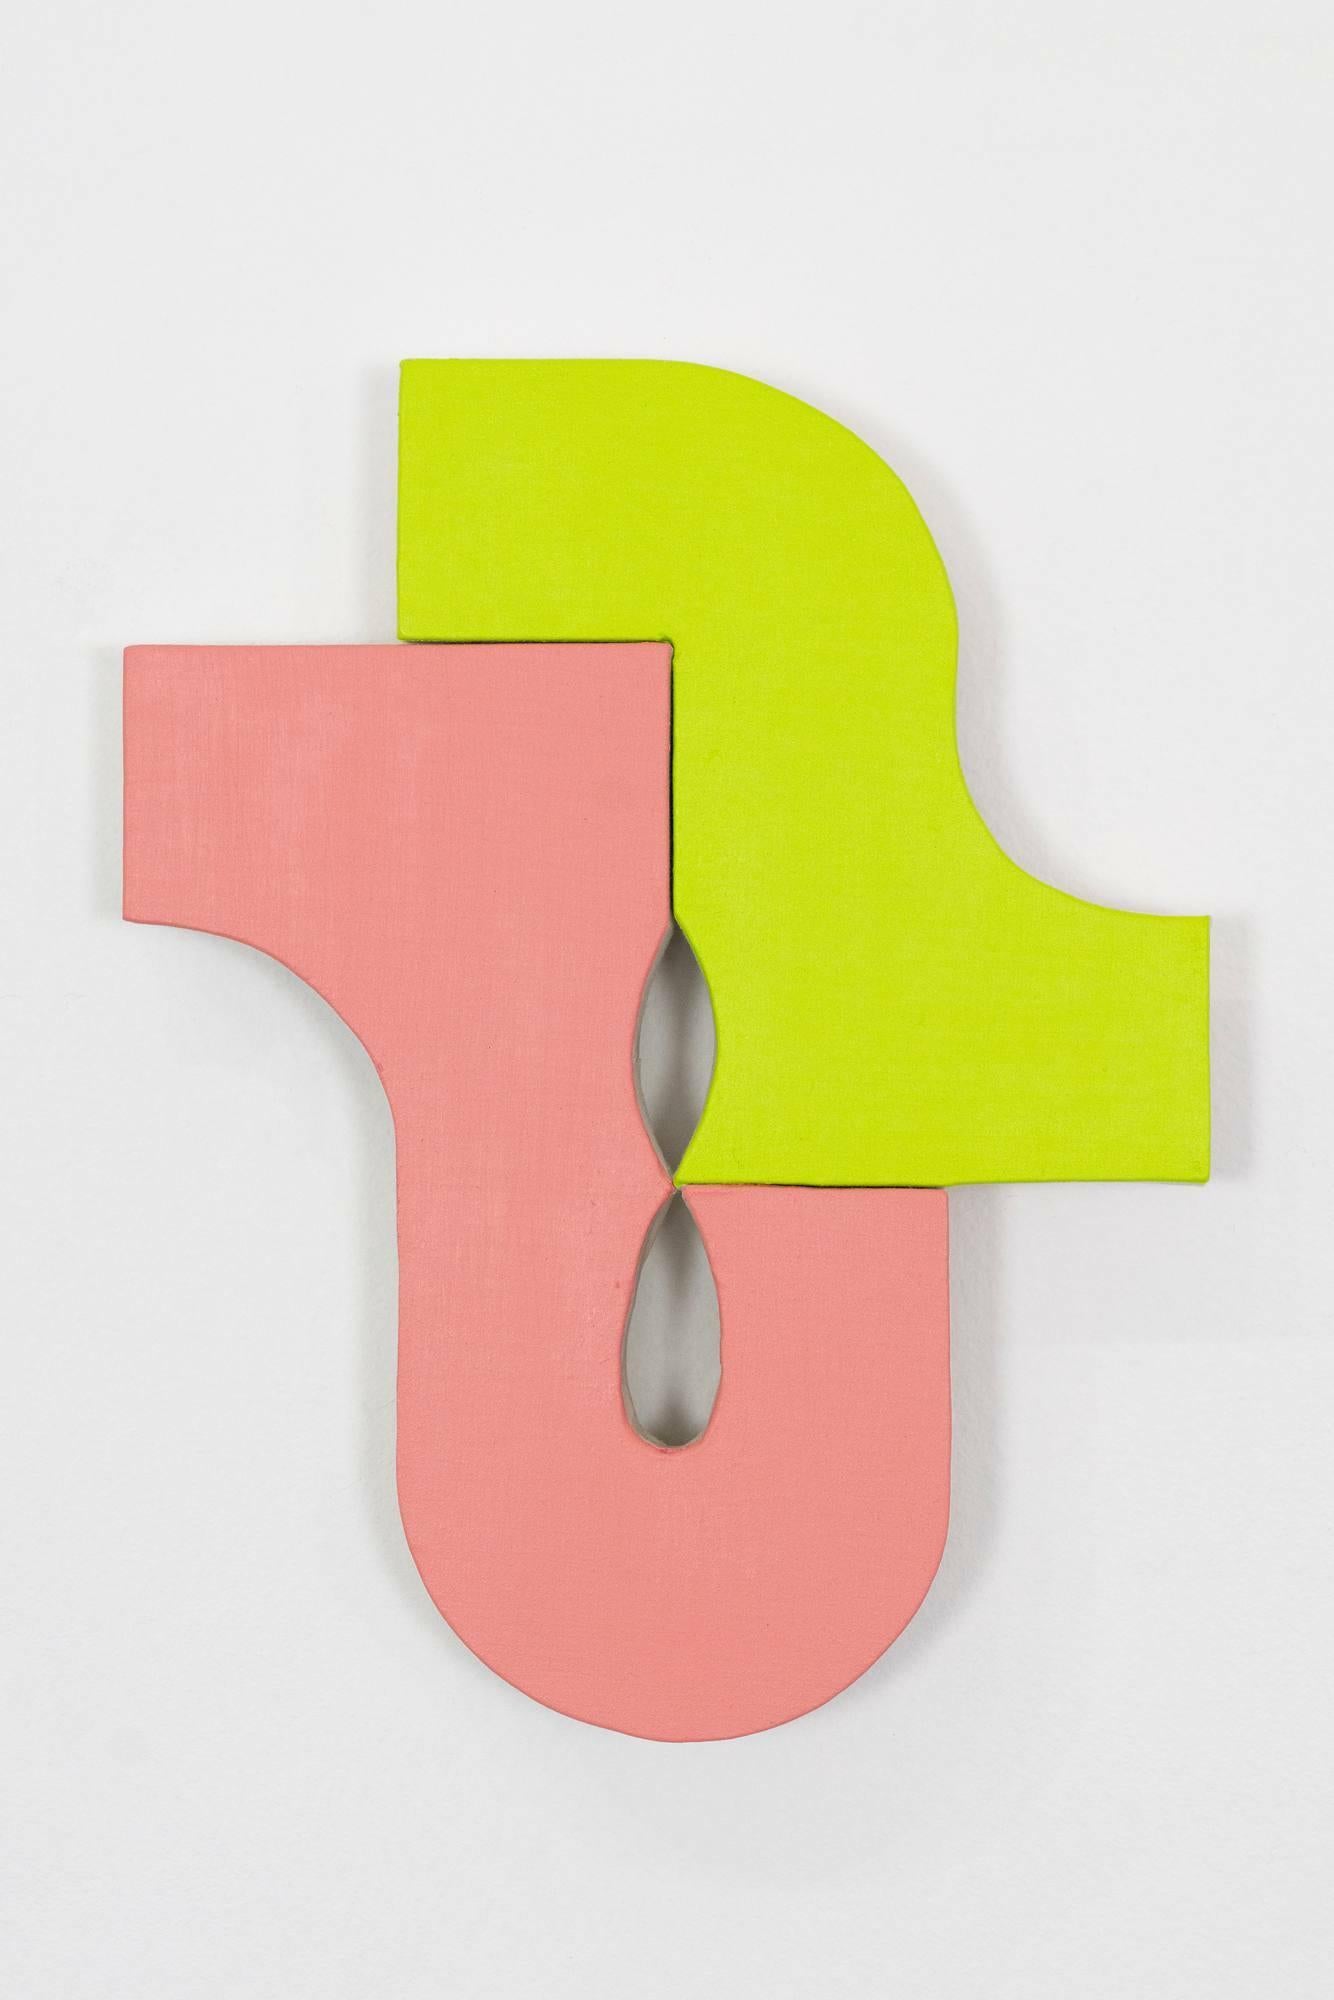 Jason Matherly Abstract Sculpture - "22-14" Mixed Media Wall Sculpture painting-  pink, chartreuse